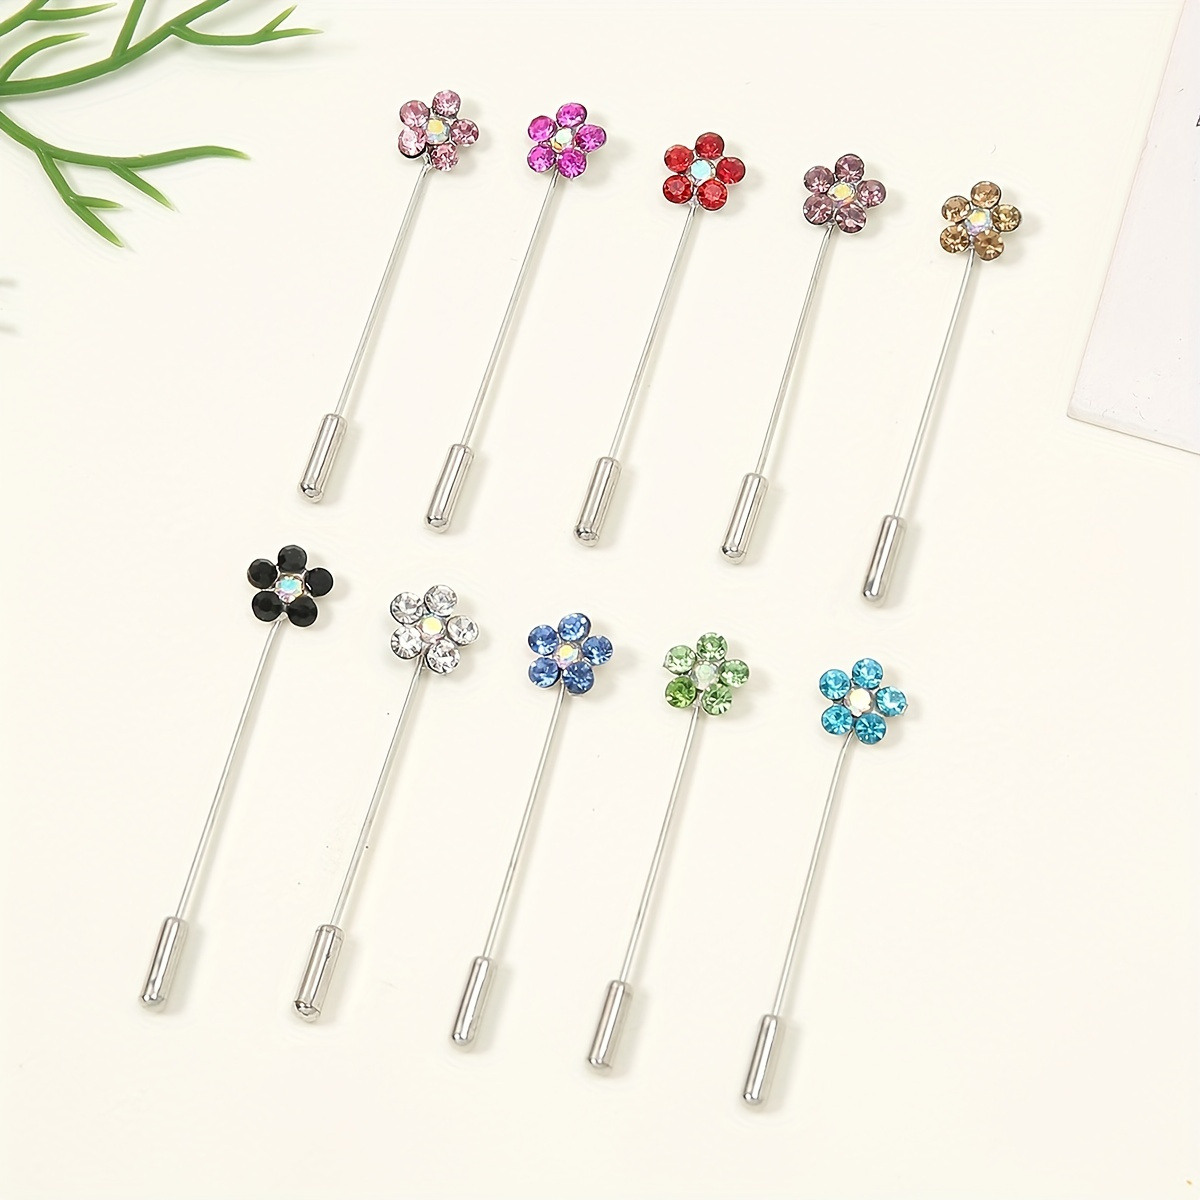 12 Pcs/Set Rhinestone Safety Hold Buckle Hijab Pins For Bandana Women Muslim  Brooches Needle Scarf Etc Clothing Accessories - AliExpress